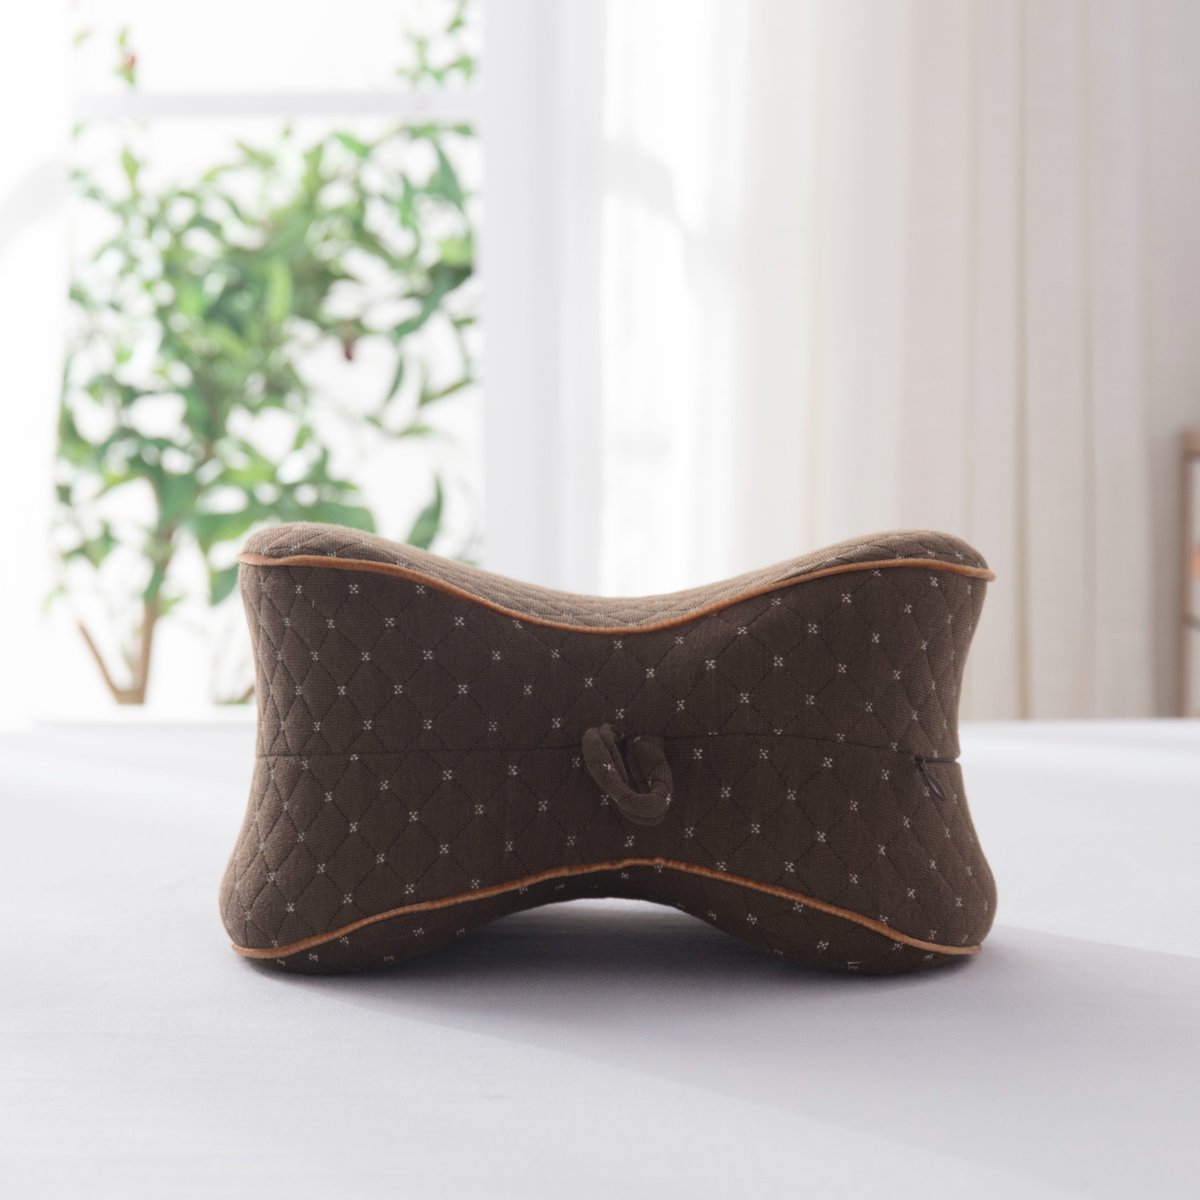 Unveiling our newest Apple Shape Leg Pillow - a coffee-colored delight! Get lost in the softness and embrace the sweet sleep you deserve! Promises ergonomic design and quality at its finest. Invest in better dreams now! #wydenhome #wydenpillow #legpillow #AppleShapeLegPillow